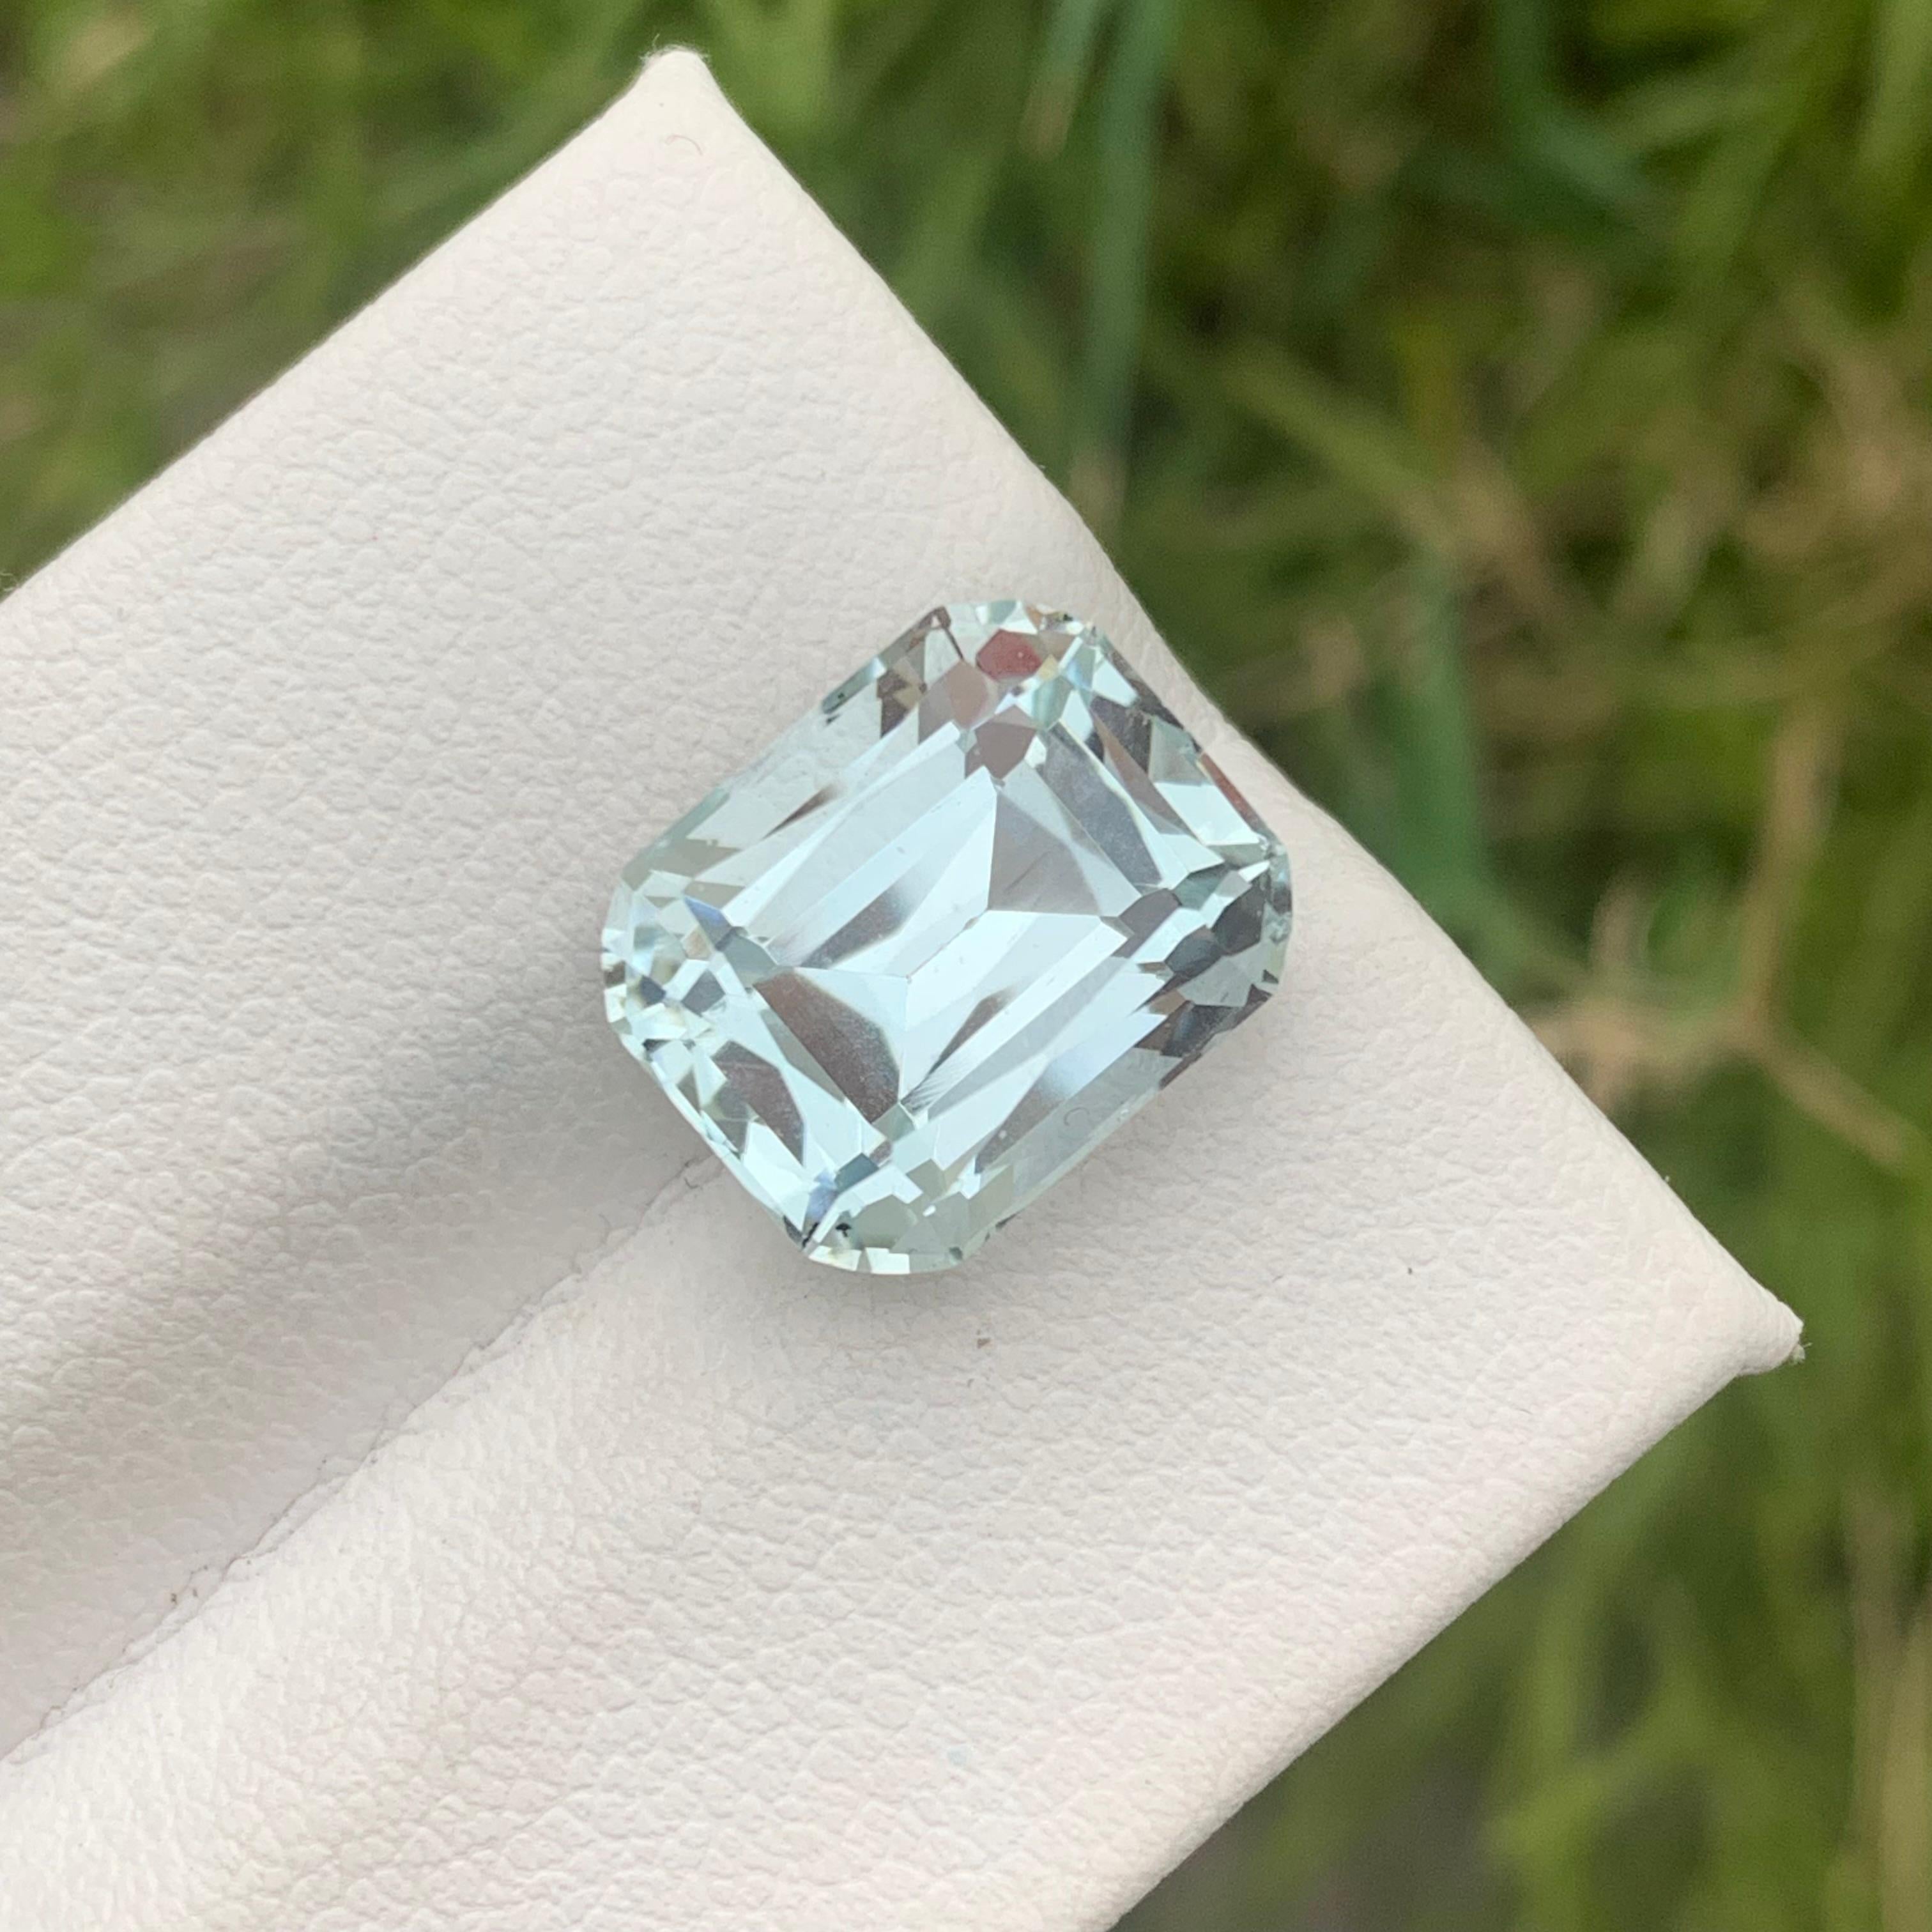 Gemstone Type : Aquamarine
Weight : 6.75 Carats
Dimensions : 12.1x9.8x8.3 mm
Clarity : Eye Clean
Origin : Pakistan
Shape: Cushion
Color: Light Blue
Certificate: On Demand
Birthstone Month: March
.
.
It has a shielding effect on your energy field and